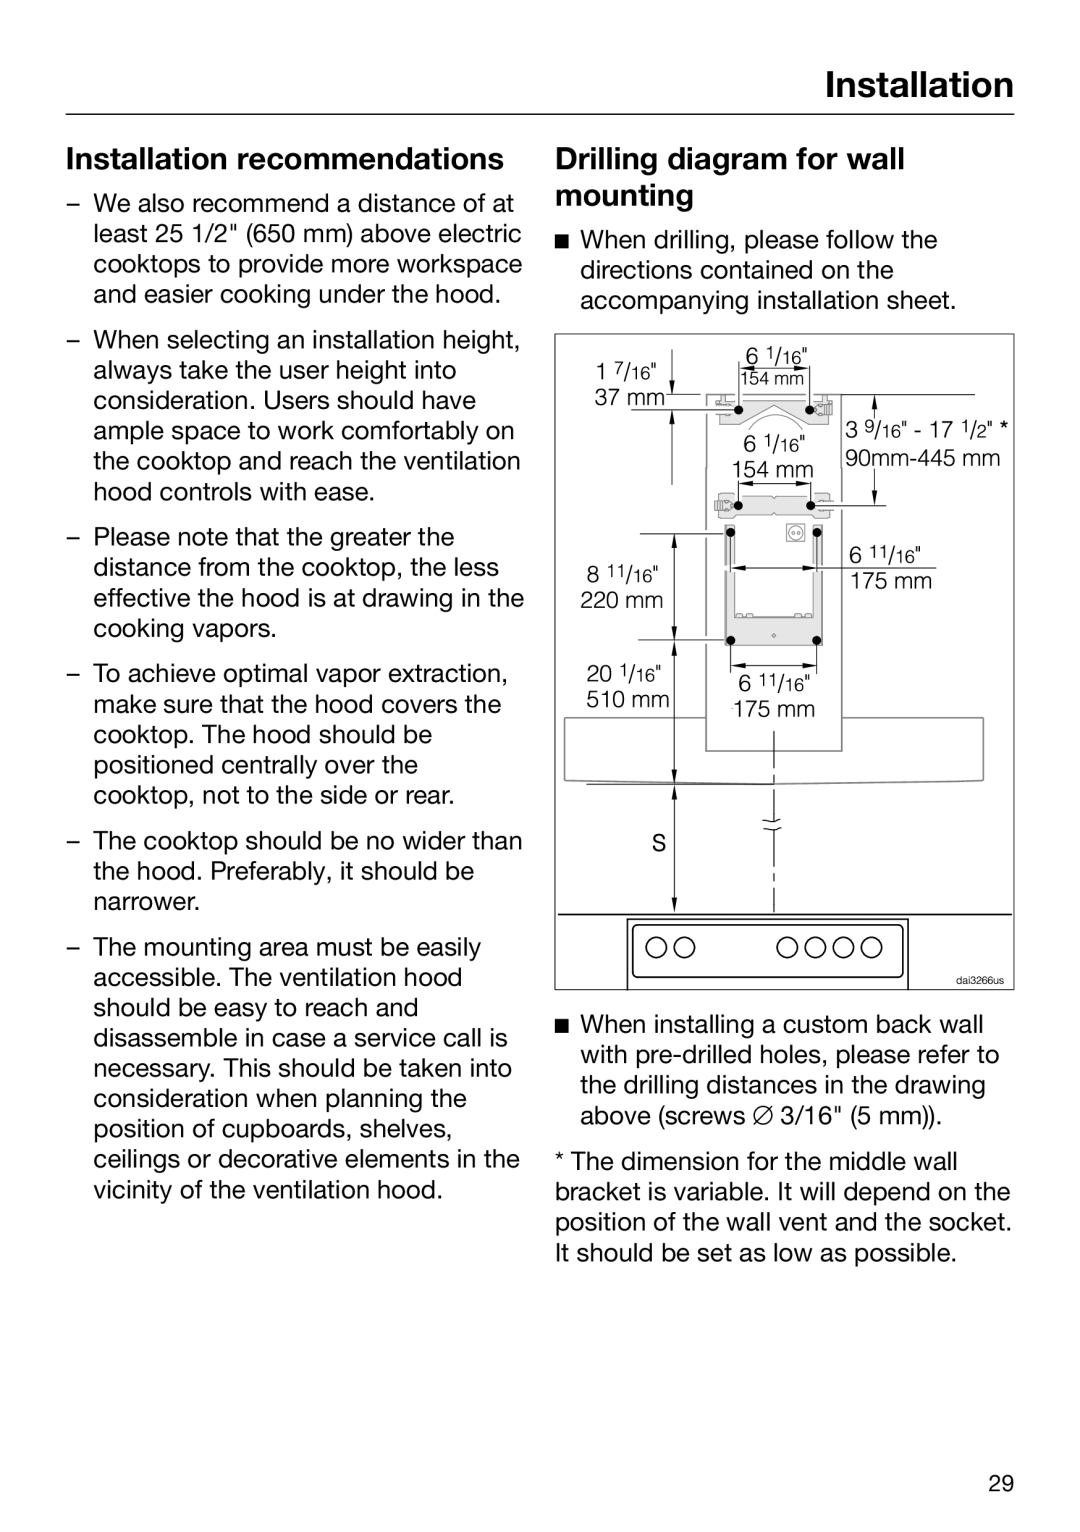 Miele 09 968 280 installation instructions Installation recommendations, Drilling diagram for wall mounting 